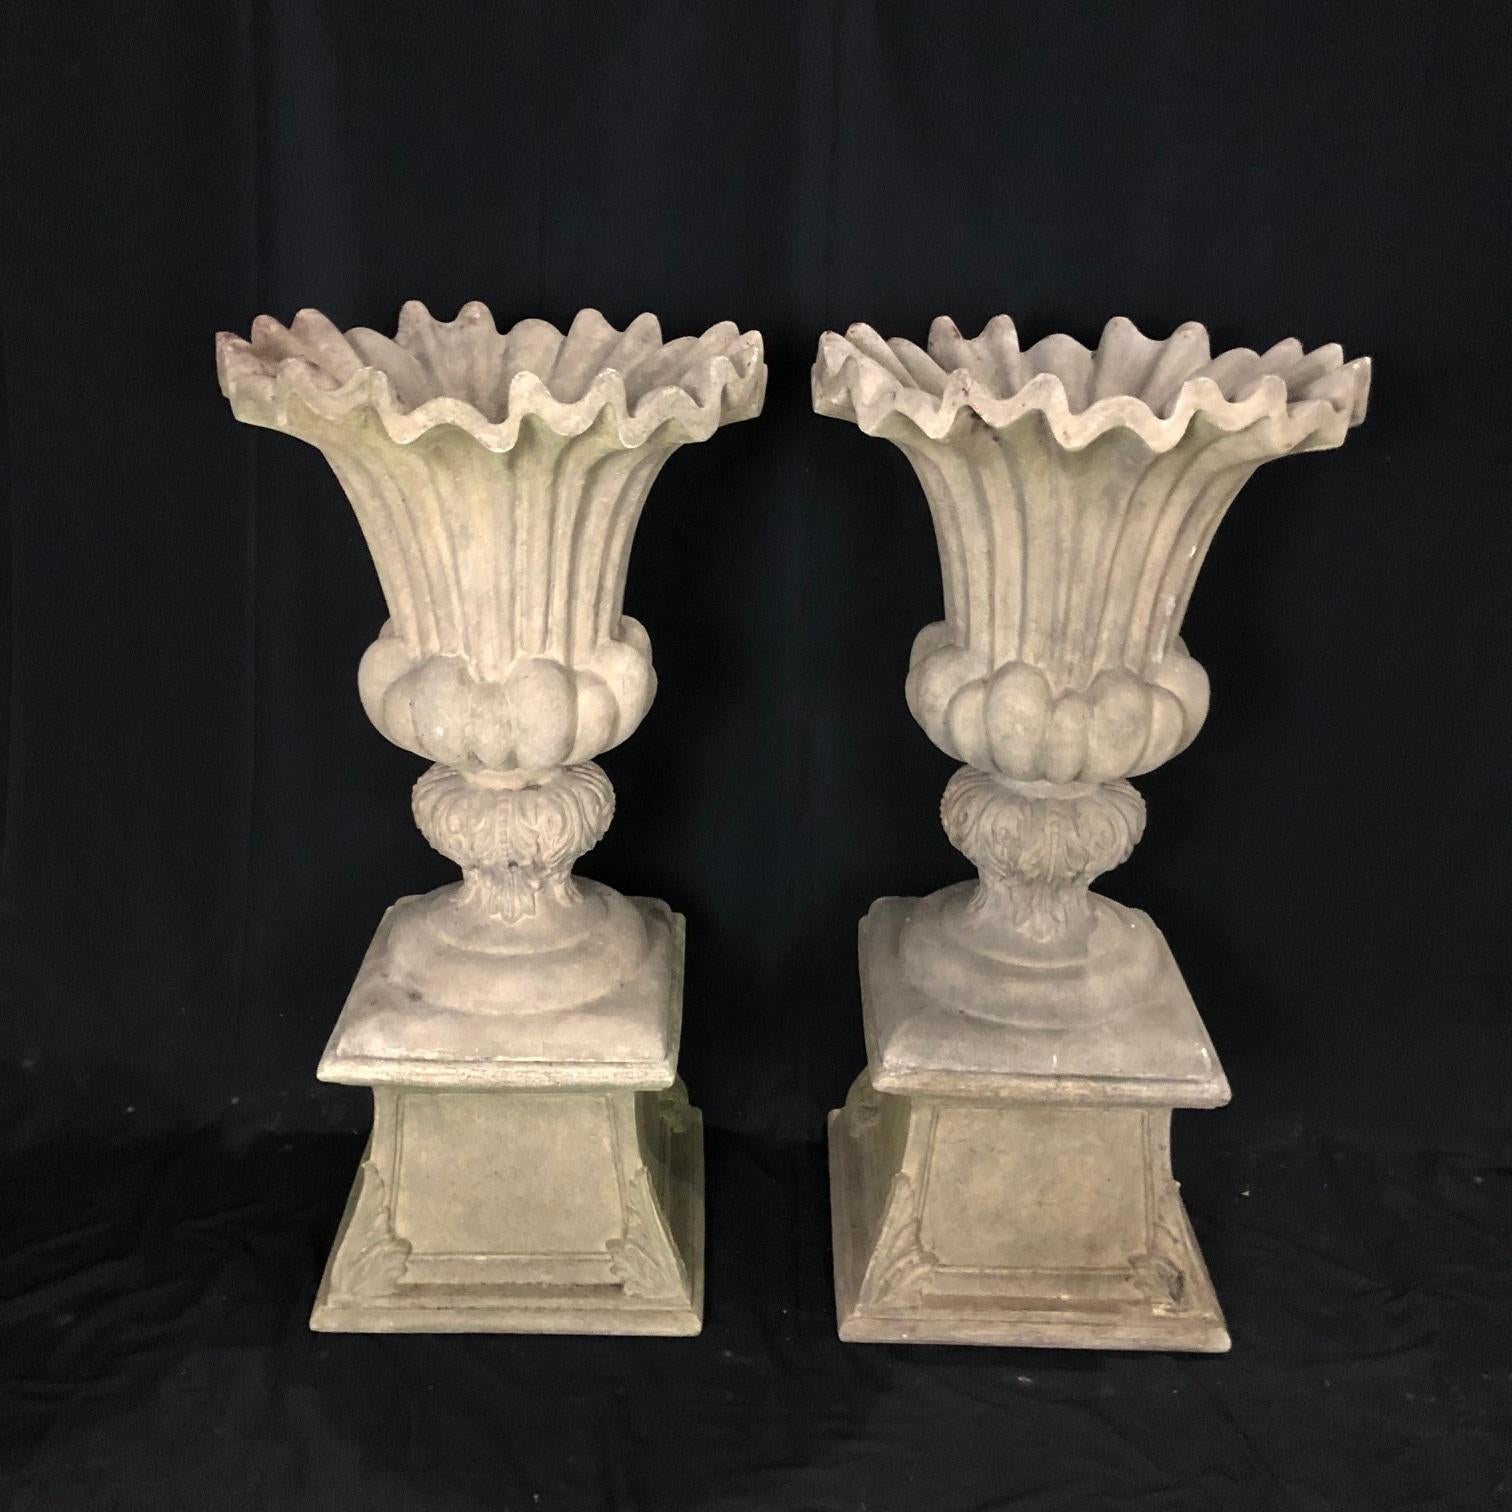 Elegant Pair of Vintage Classical Garden Planter Urns and Bases 5